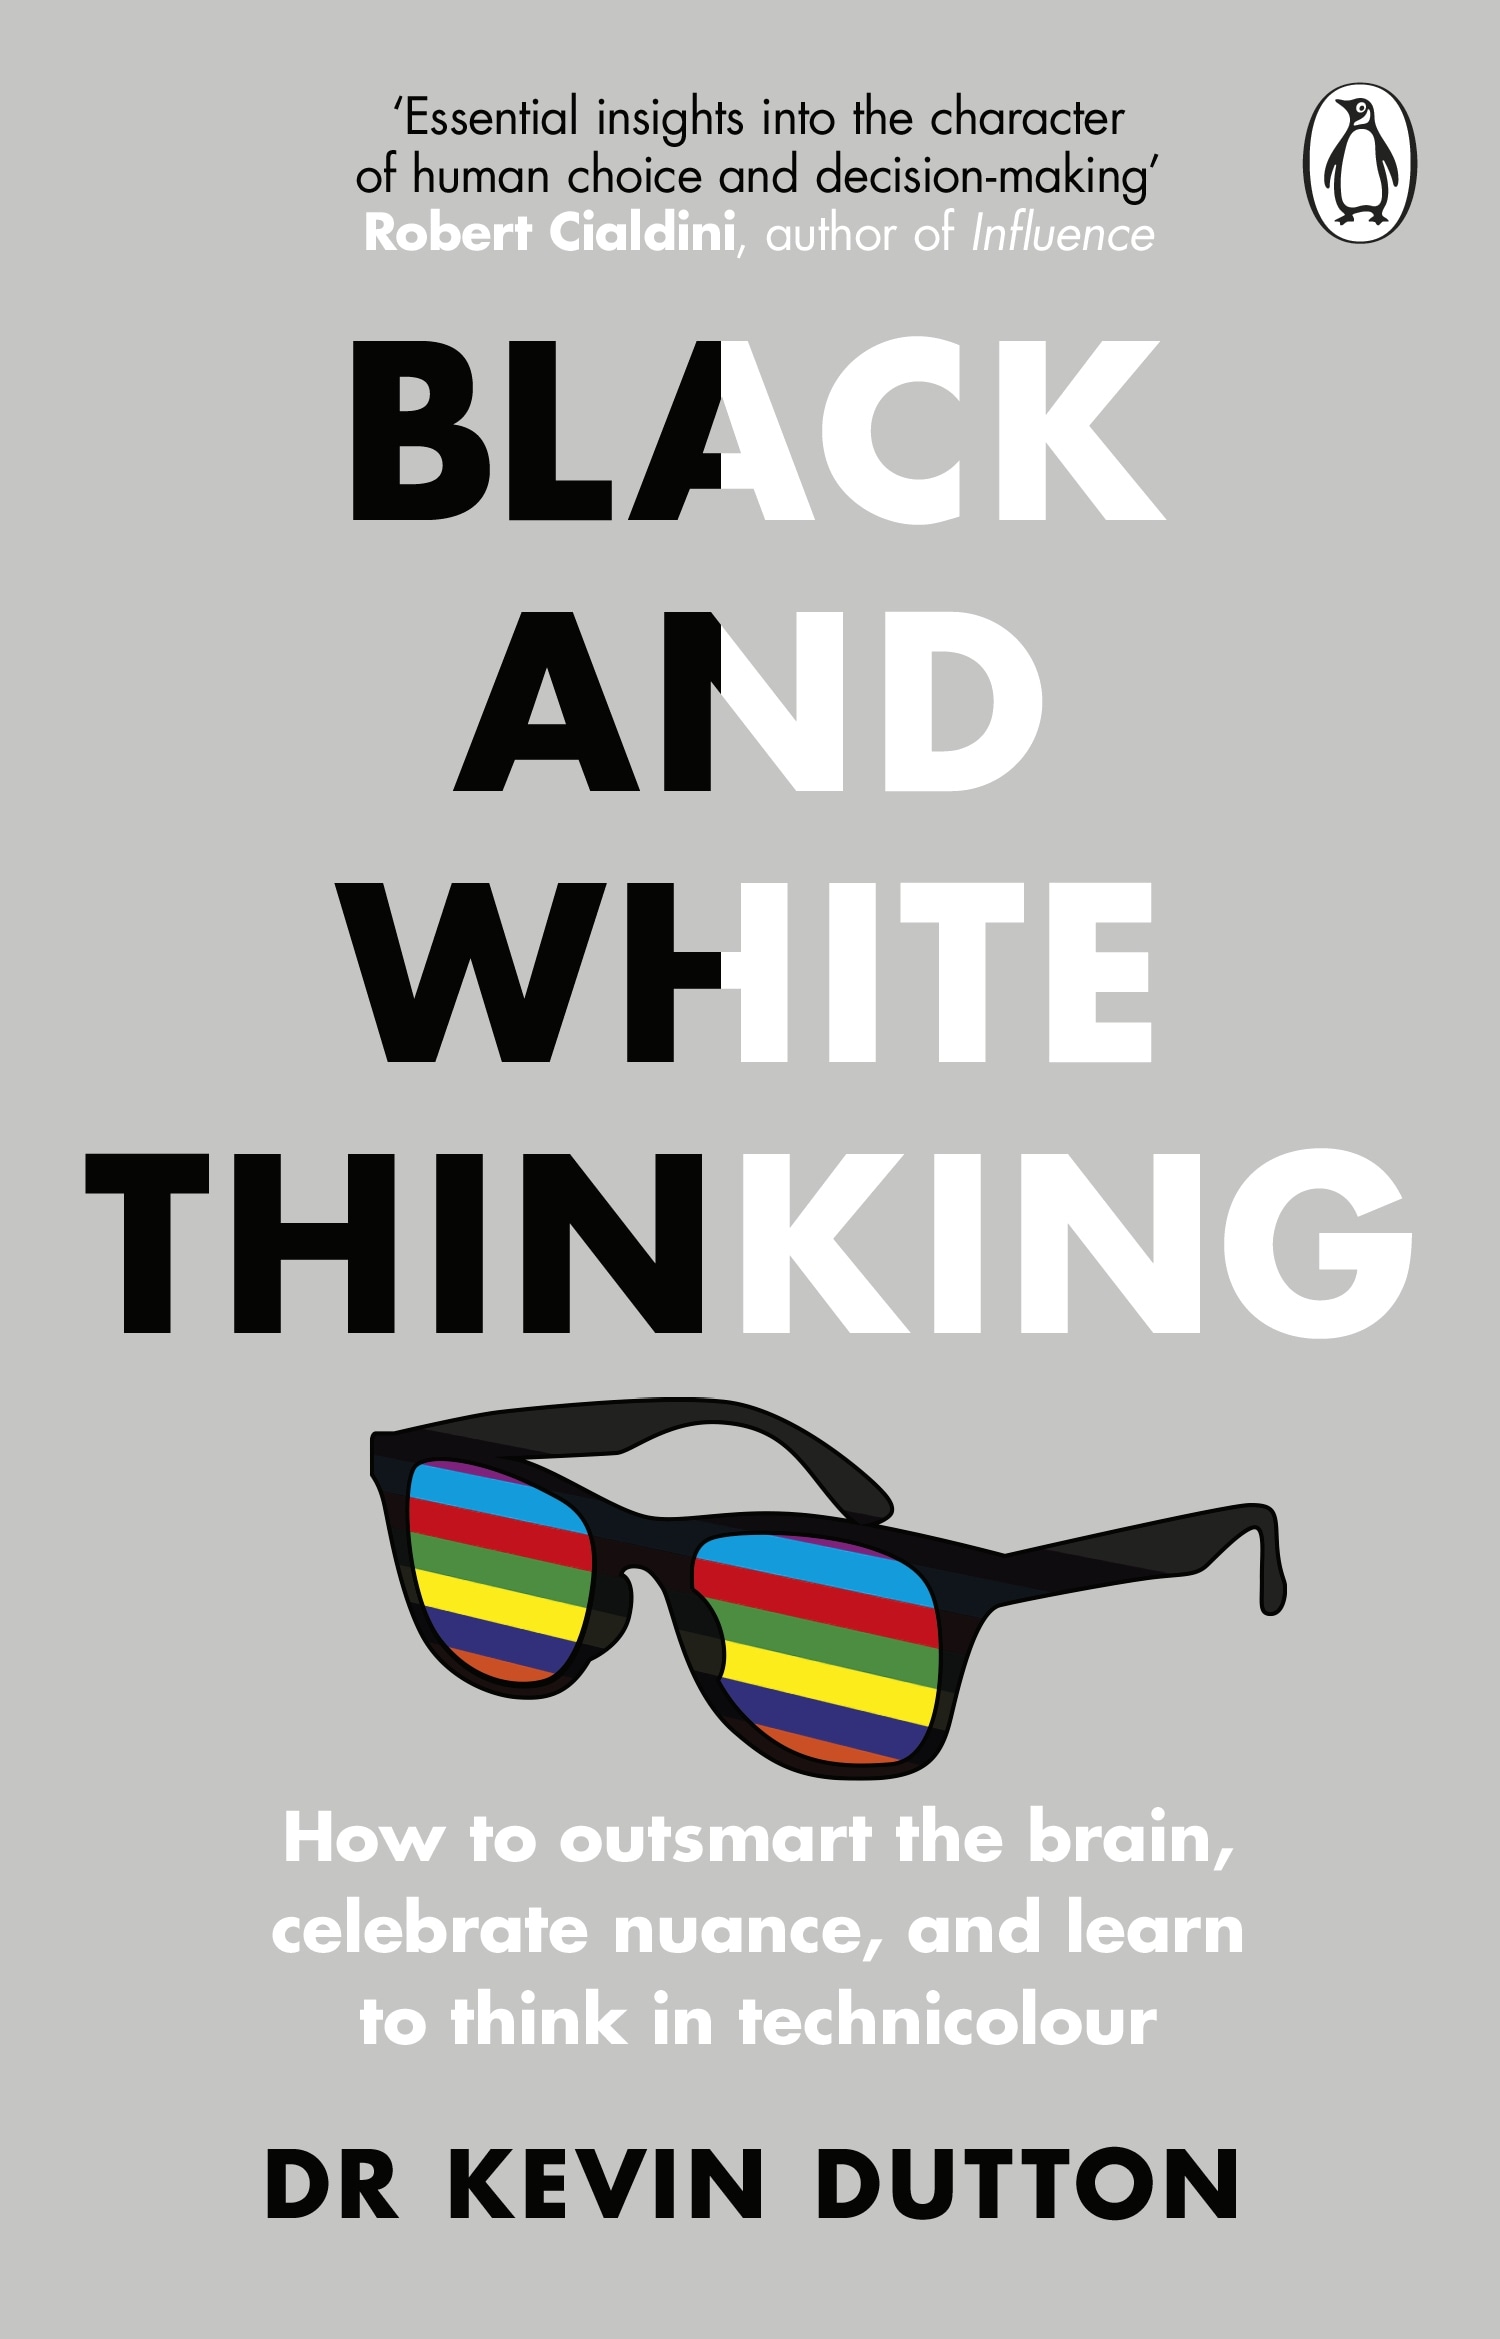 Book “Black and White Thinking” by Kevin Dutton — January 22, 2022